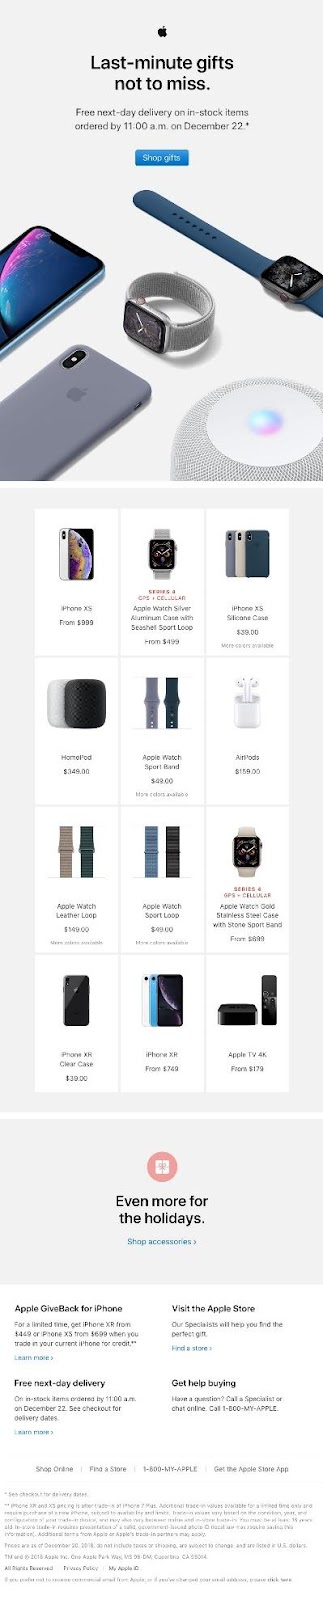 Apple last minute gift ideas email example